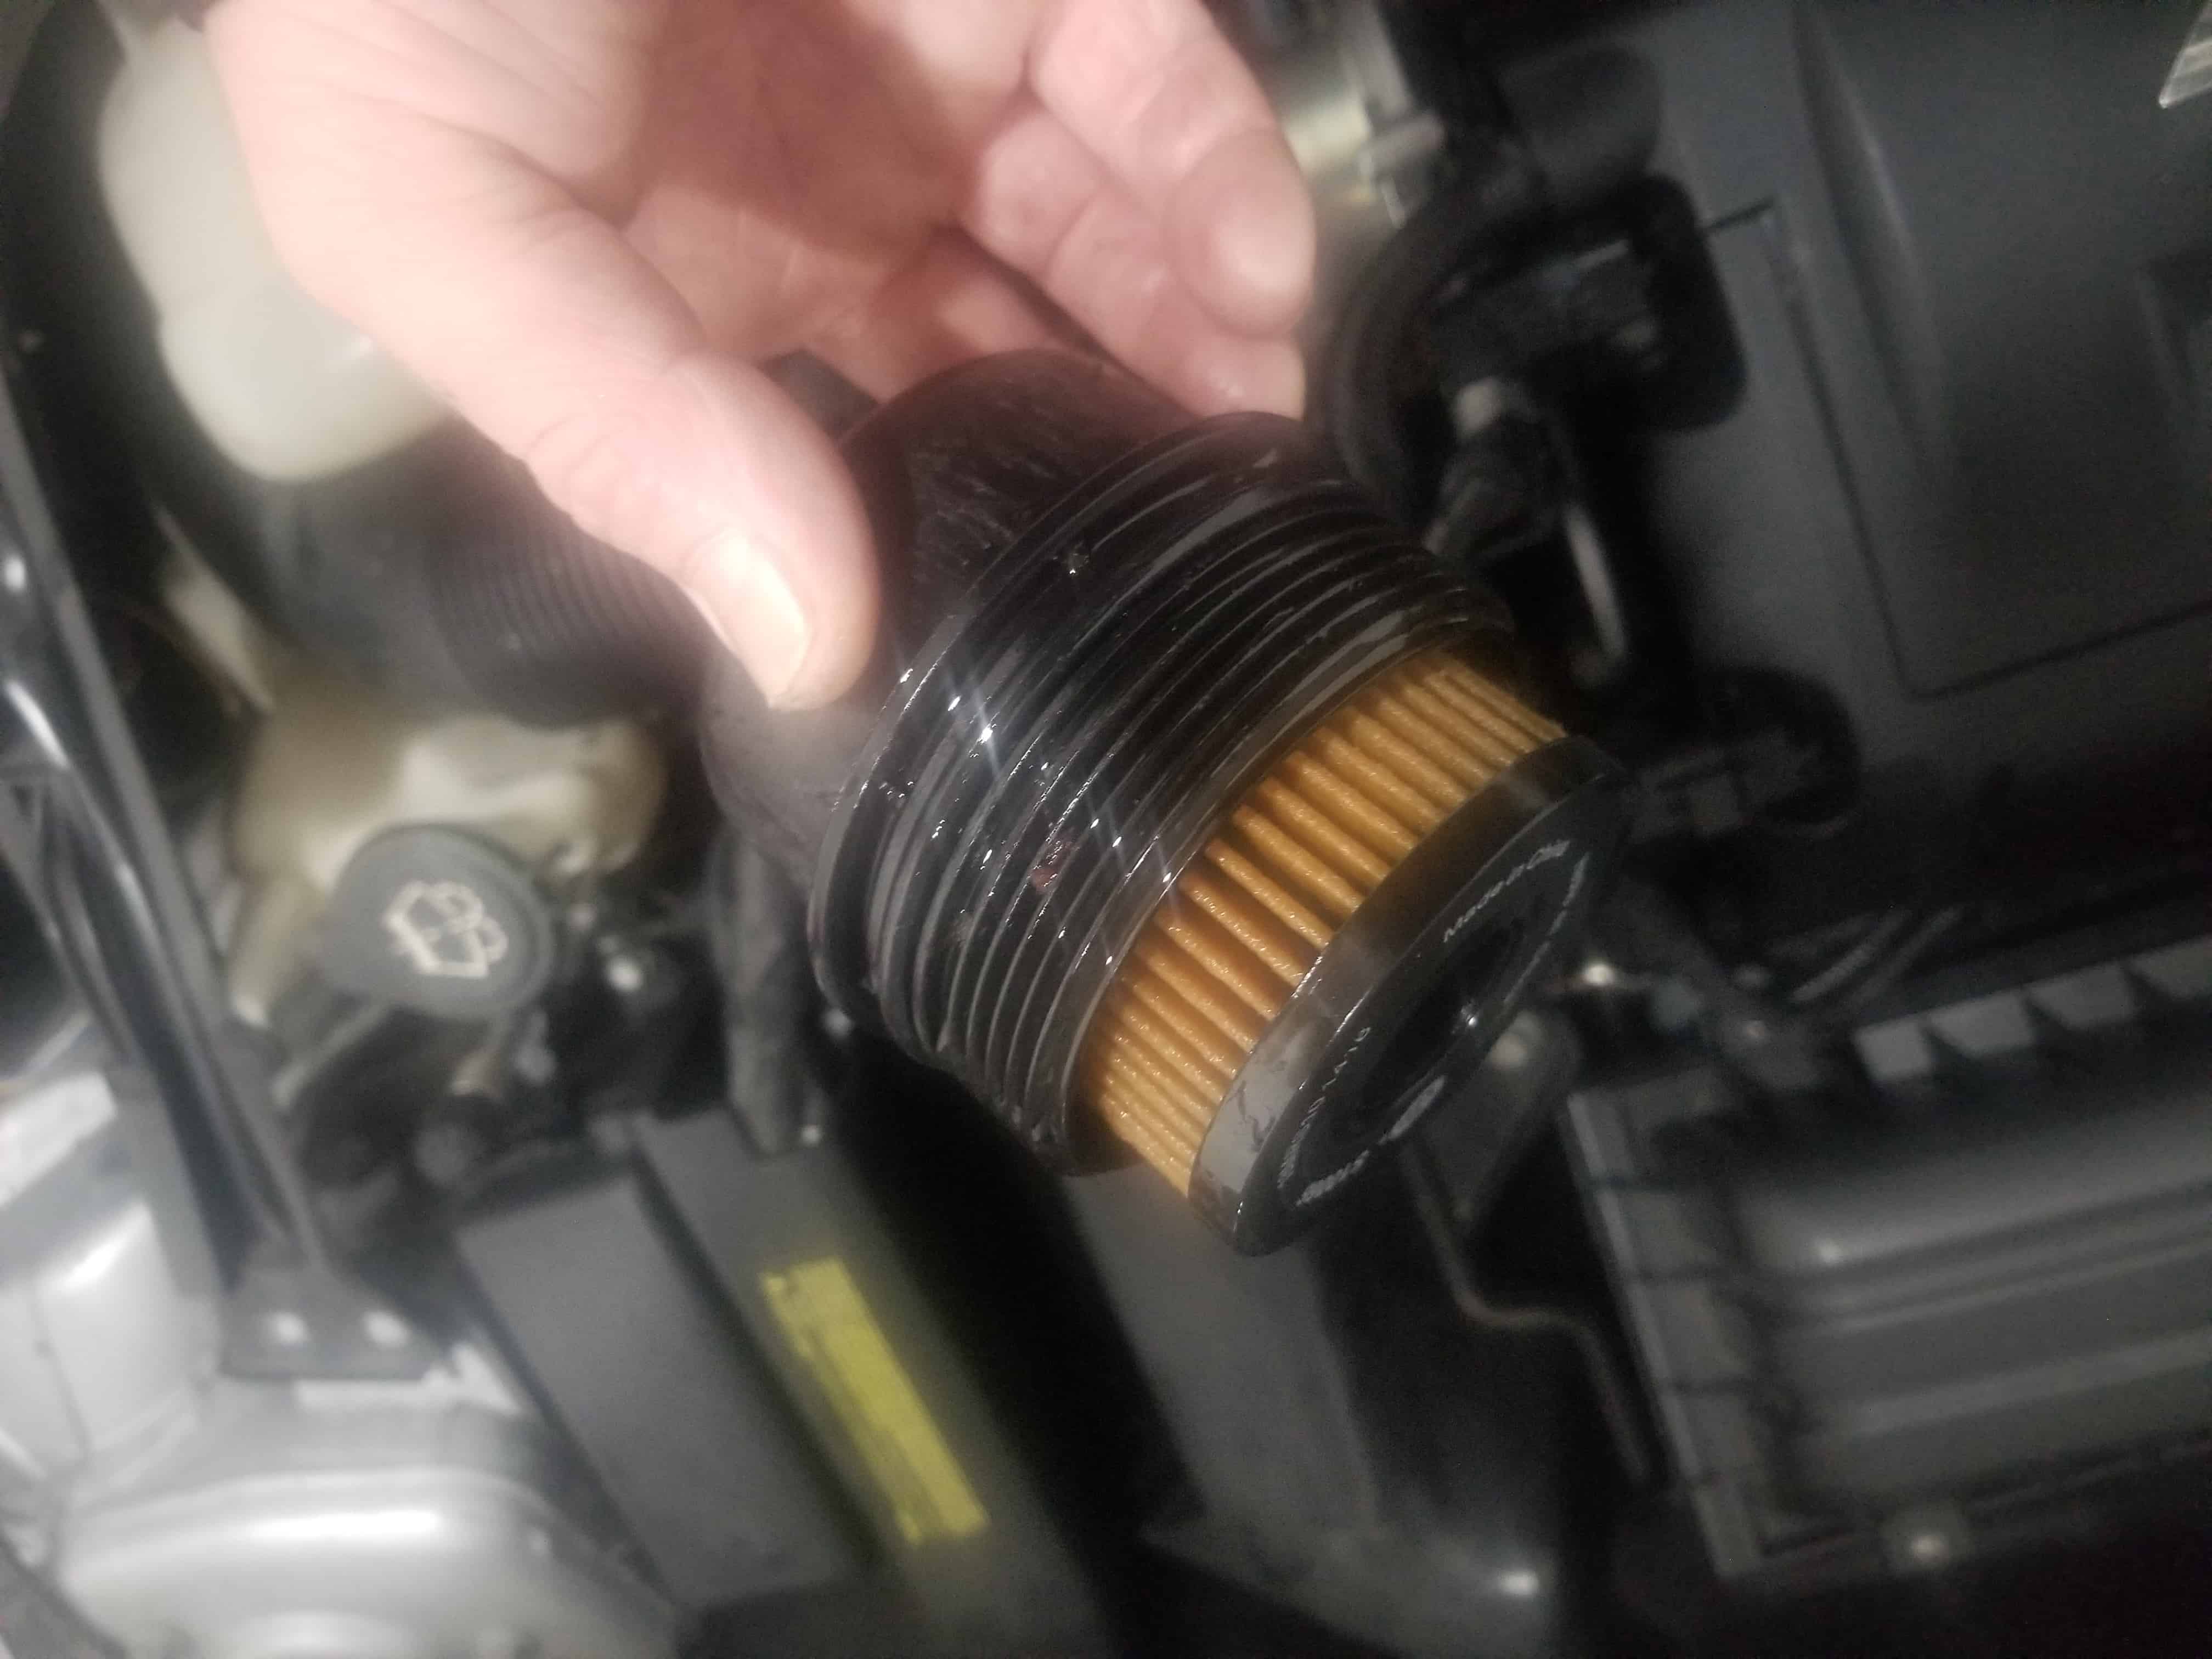 MINI R56 Oil Pan Gasket Replacement - remove the filter cover